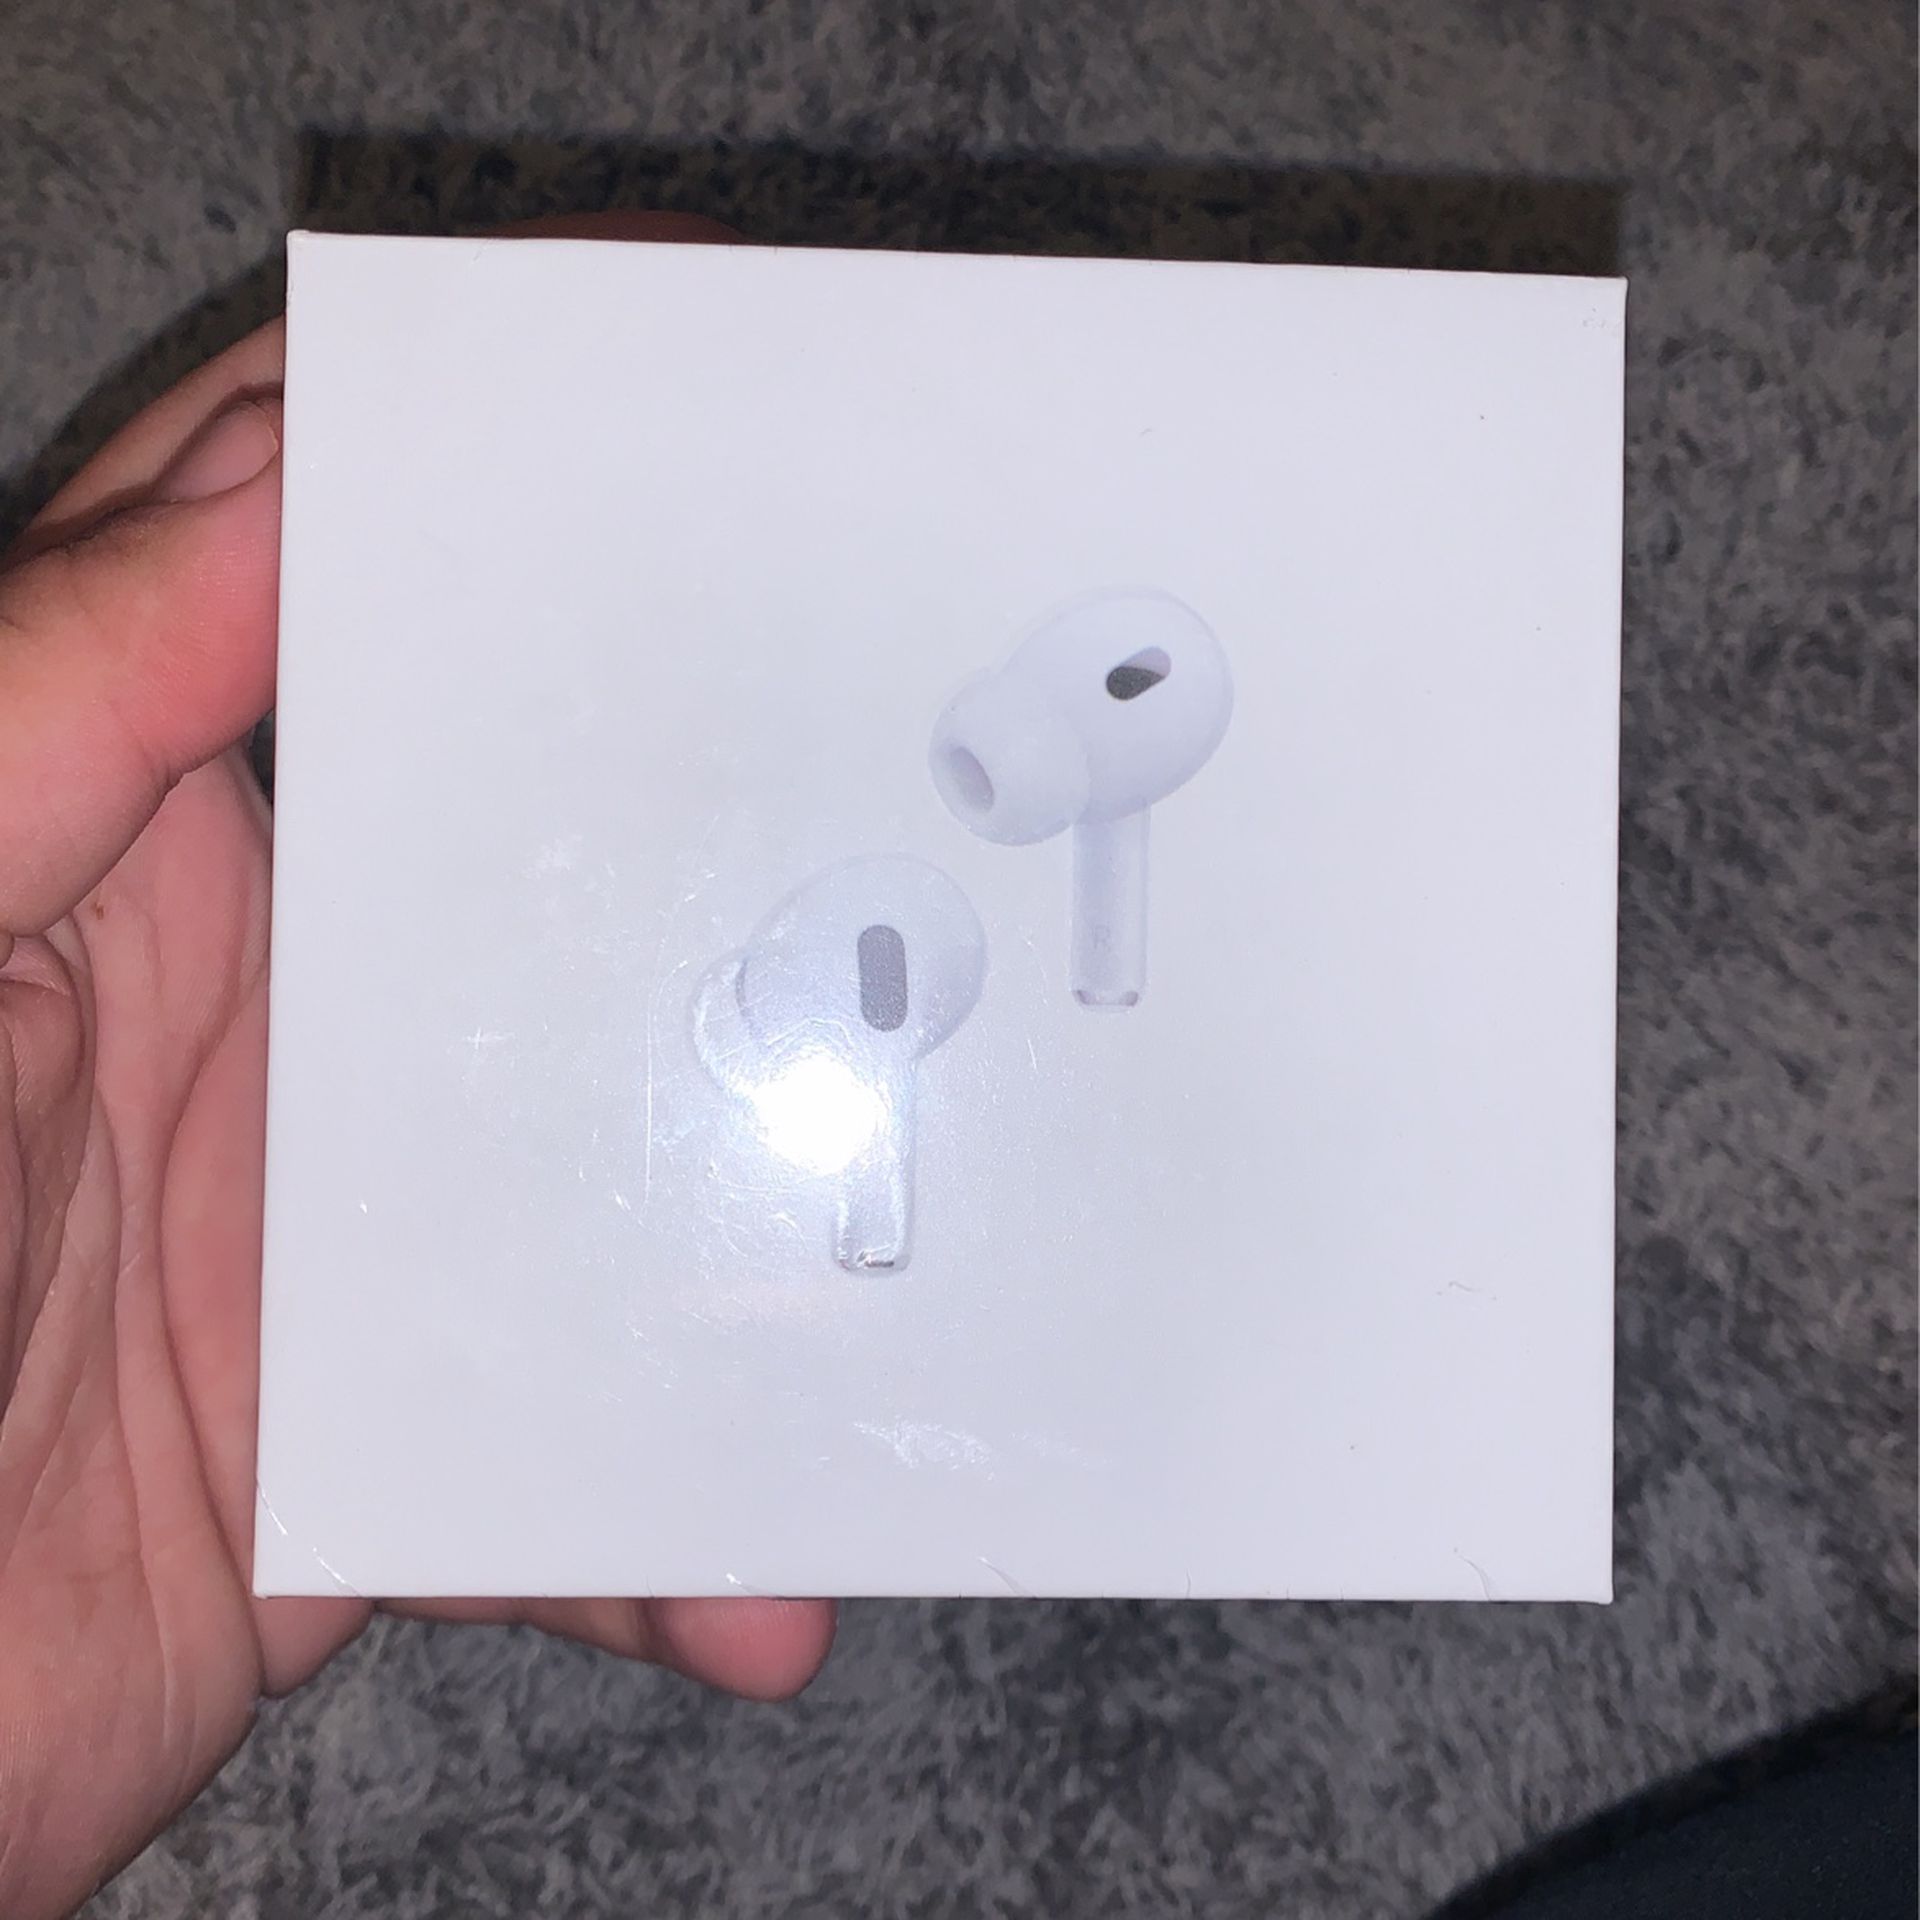 Reps AirPods Pro